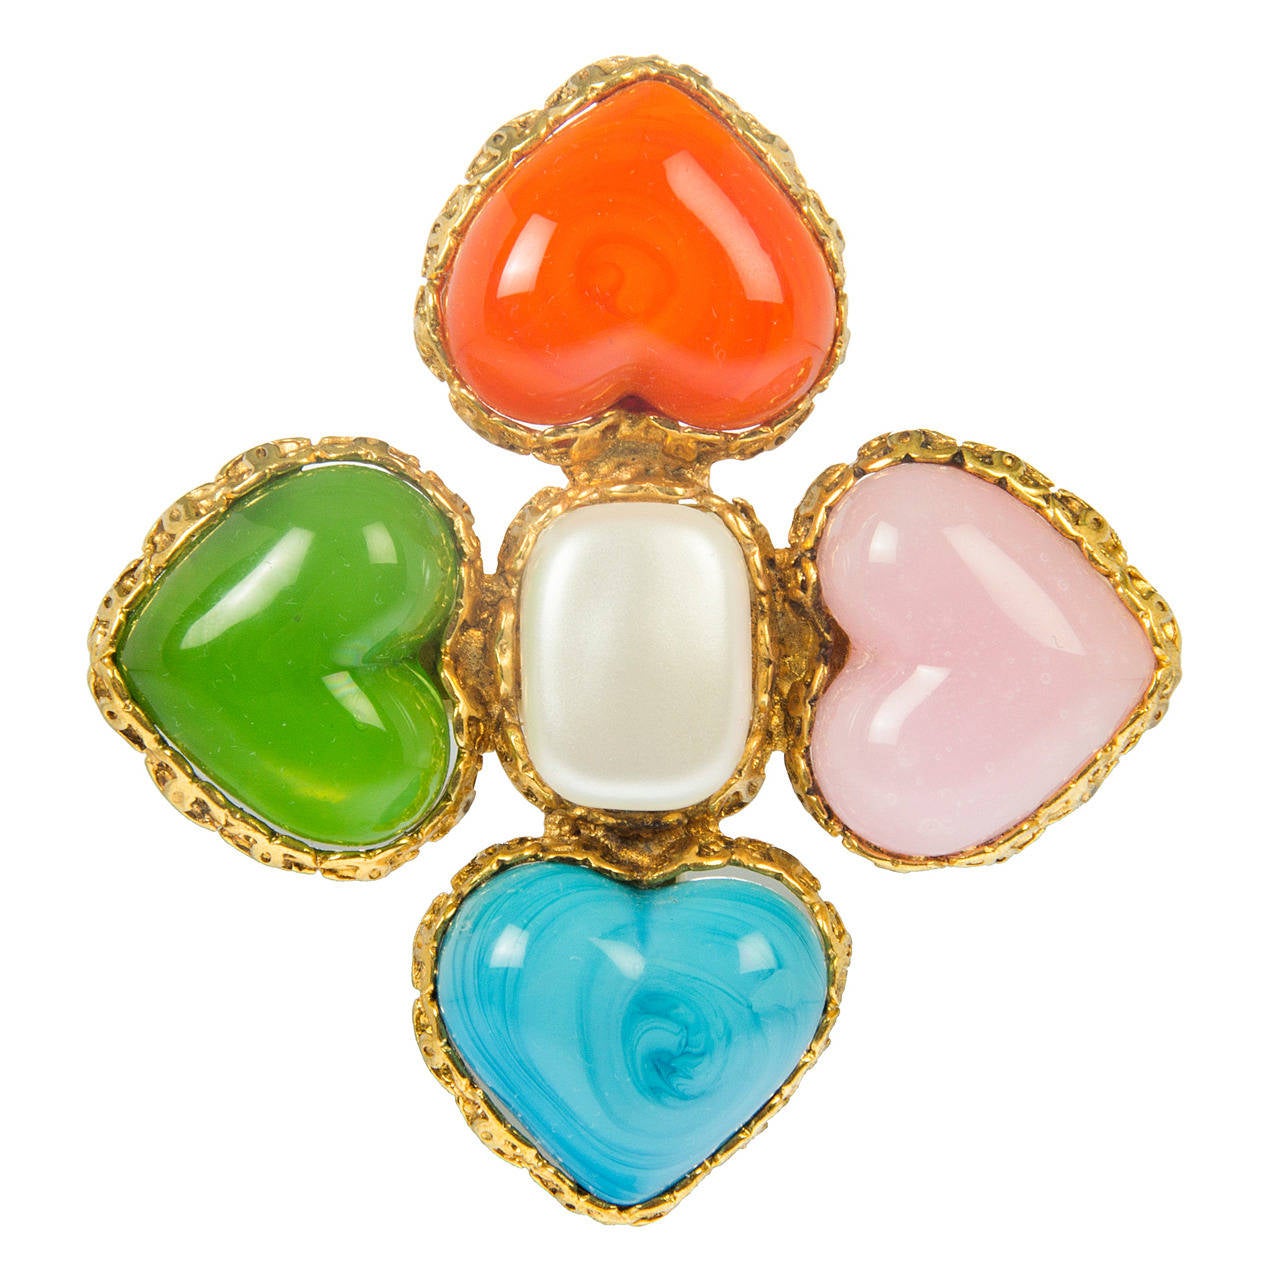 CHANEL Poured Glass Gripoix and Faux Pearl Heart Brooch